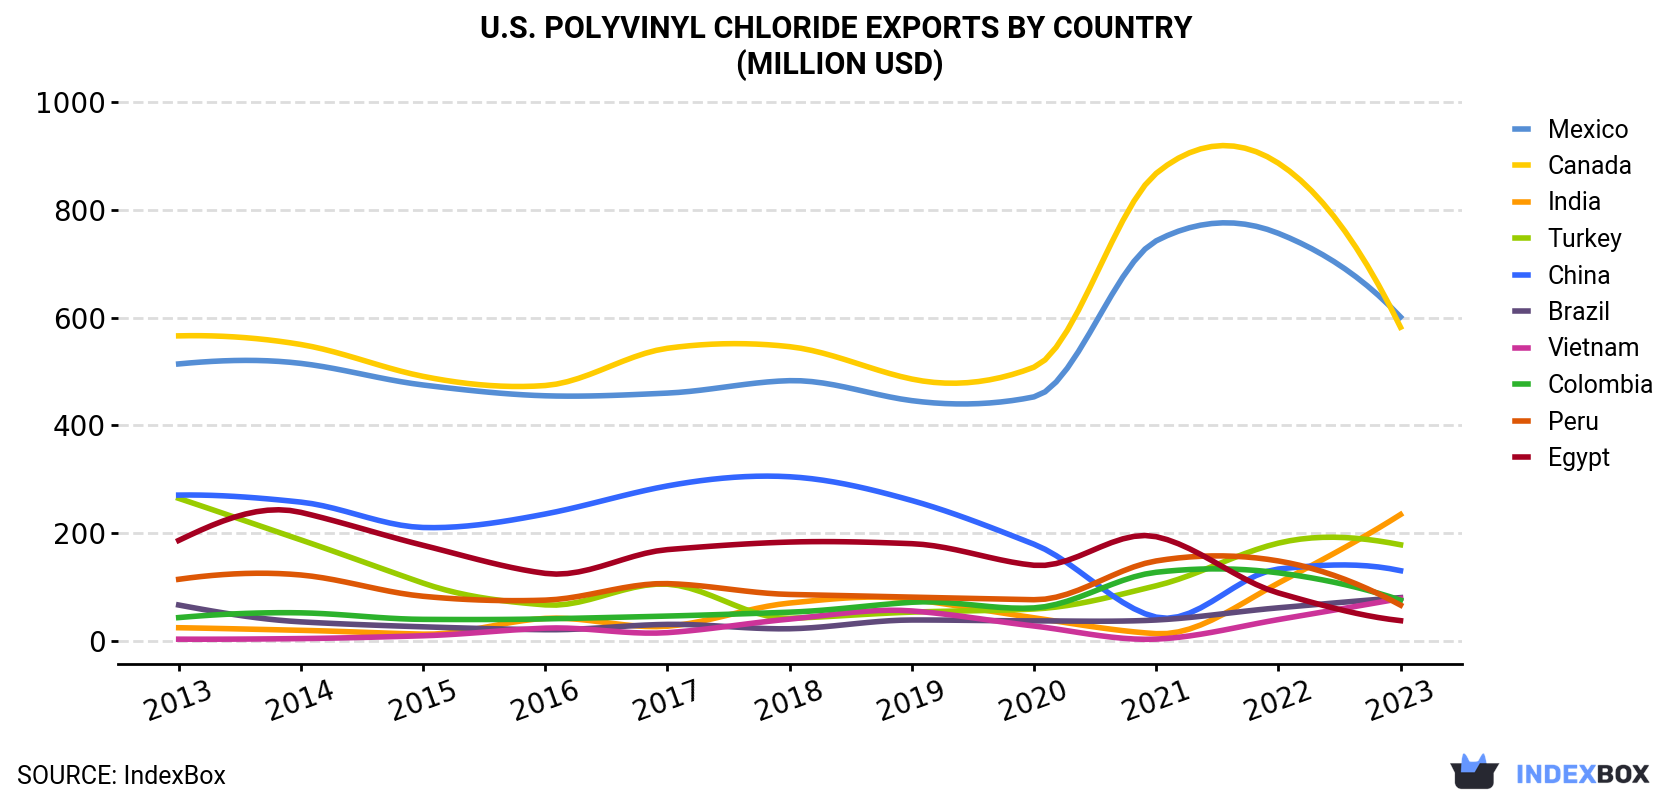 U.S. Polyvinyl Chloride Exports By Country (Million USD)